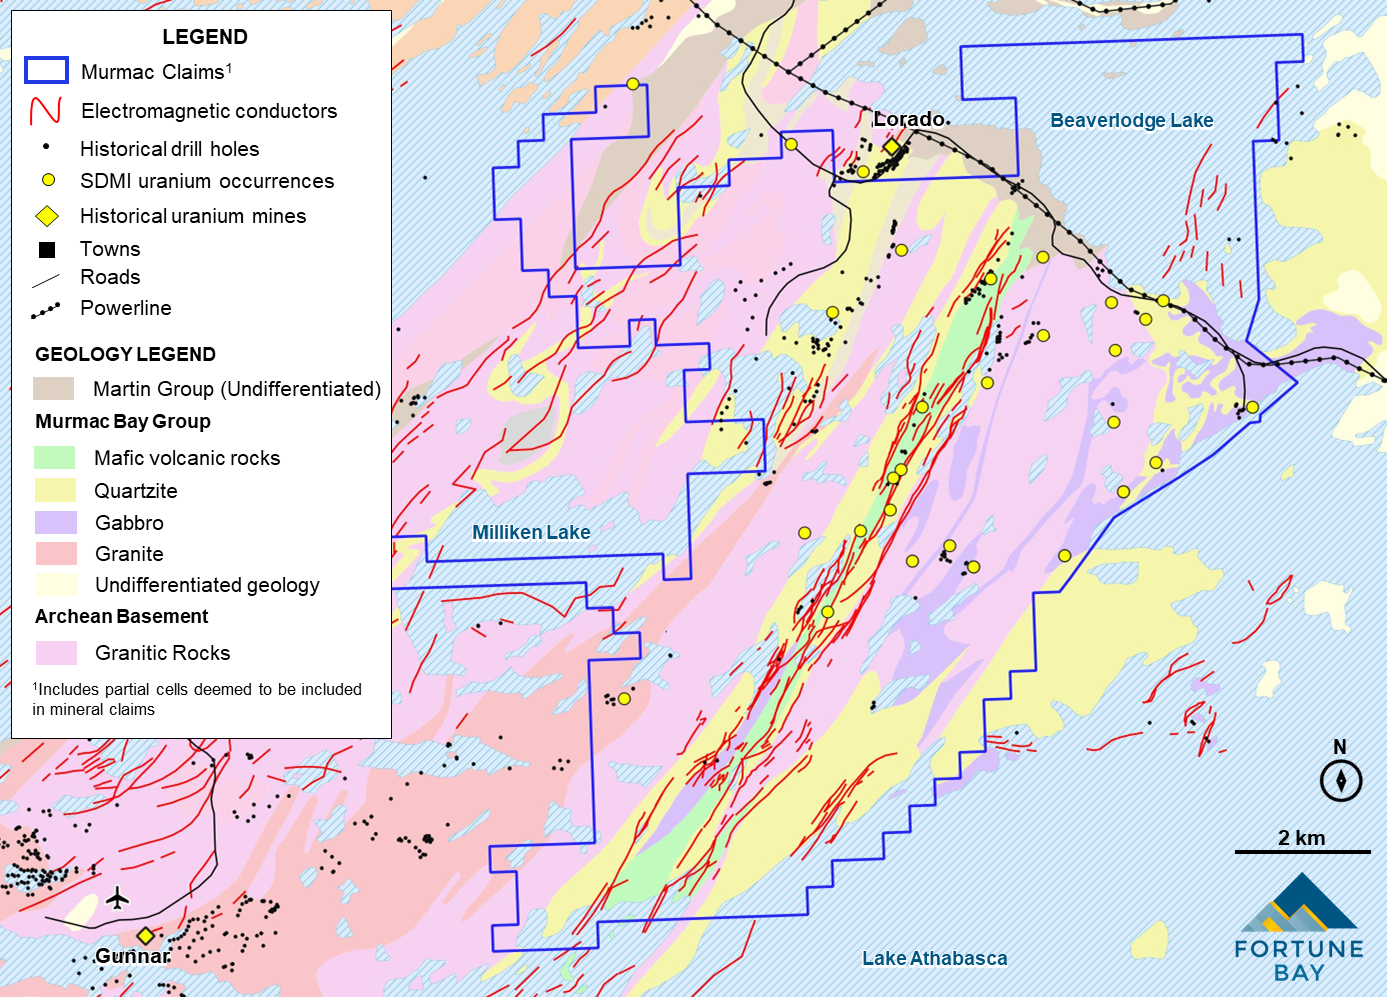 Murmac Geology and Uranium Occurrence Highlights